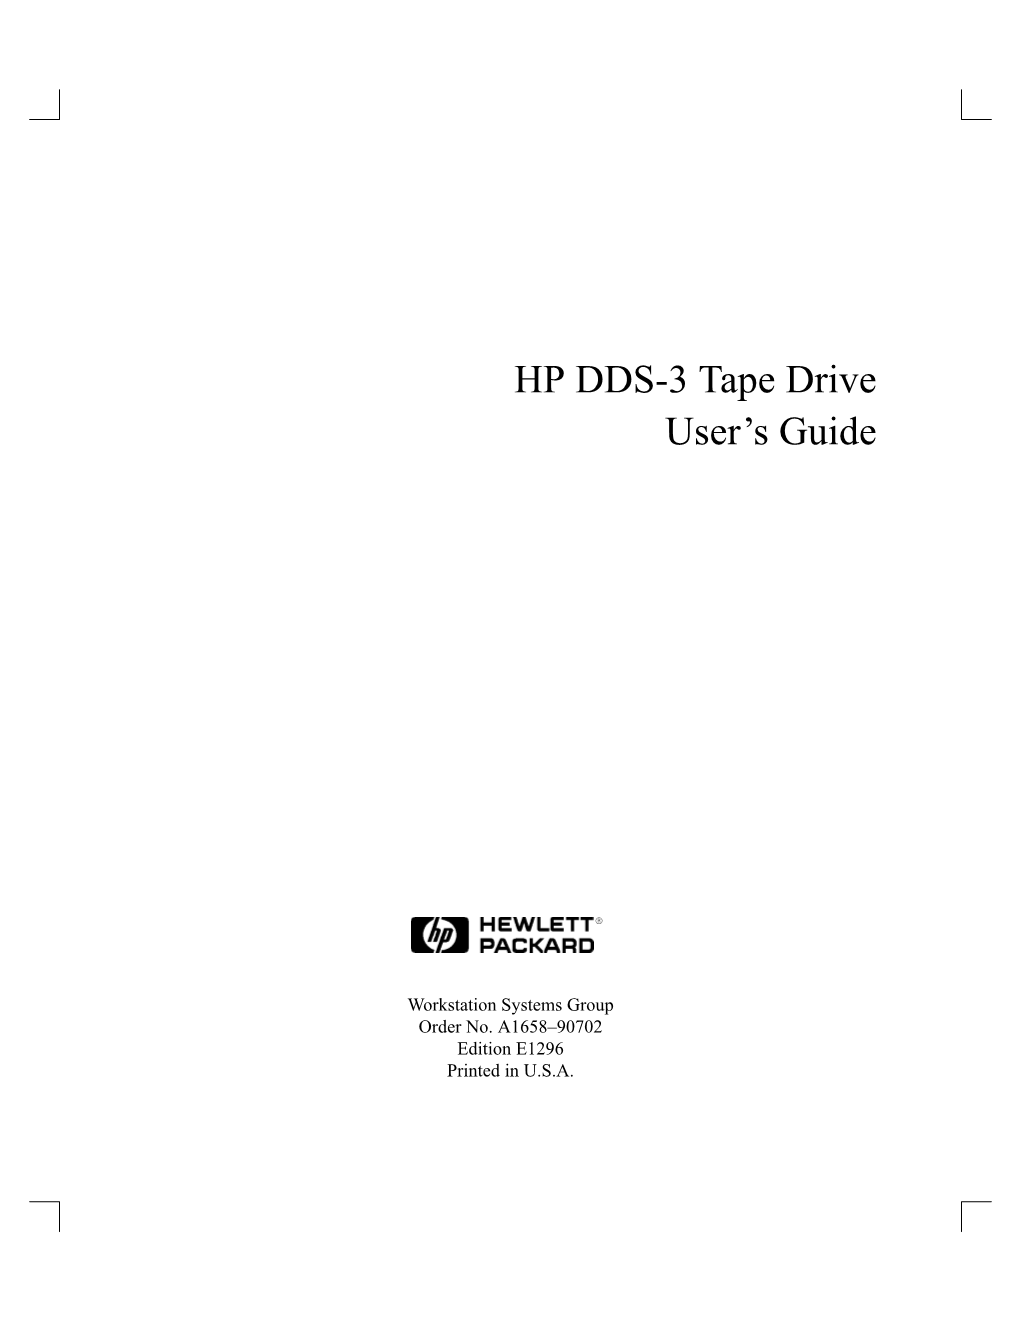 HP DDS-3 Tape Drive User's Guide